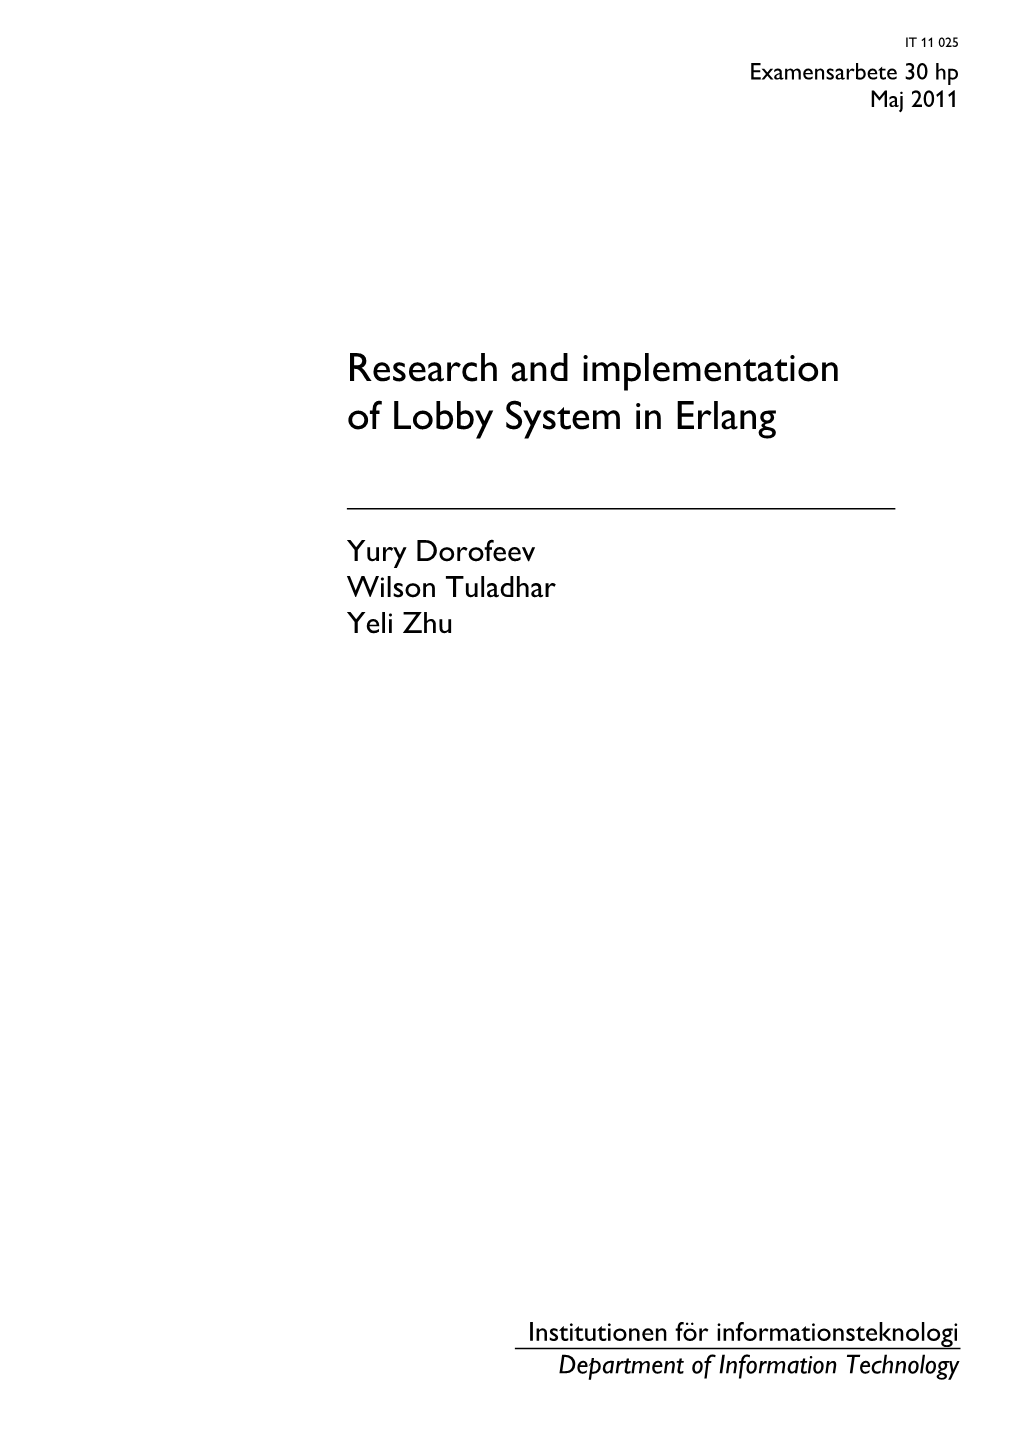 Research and Implementation of Lobby System in Erlang